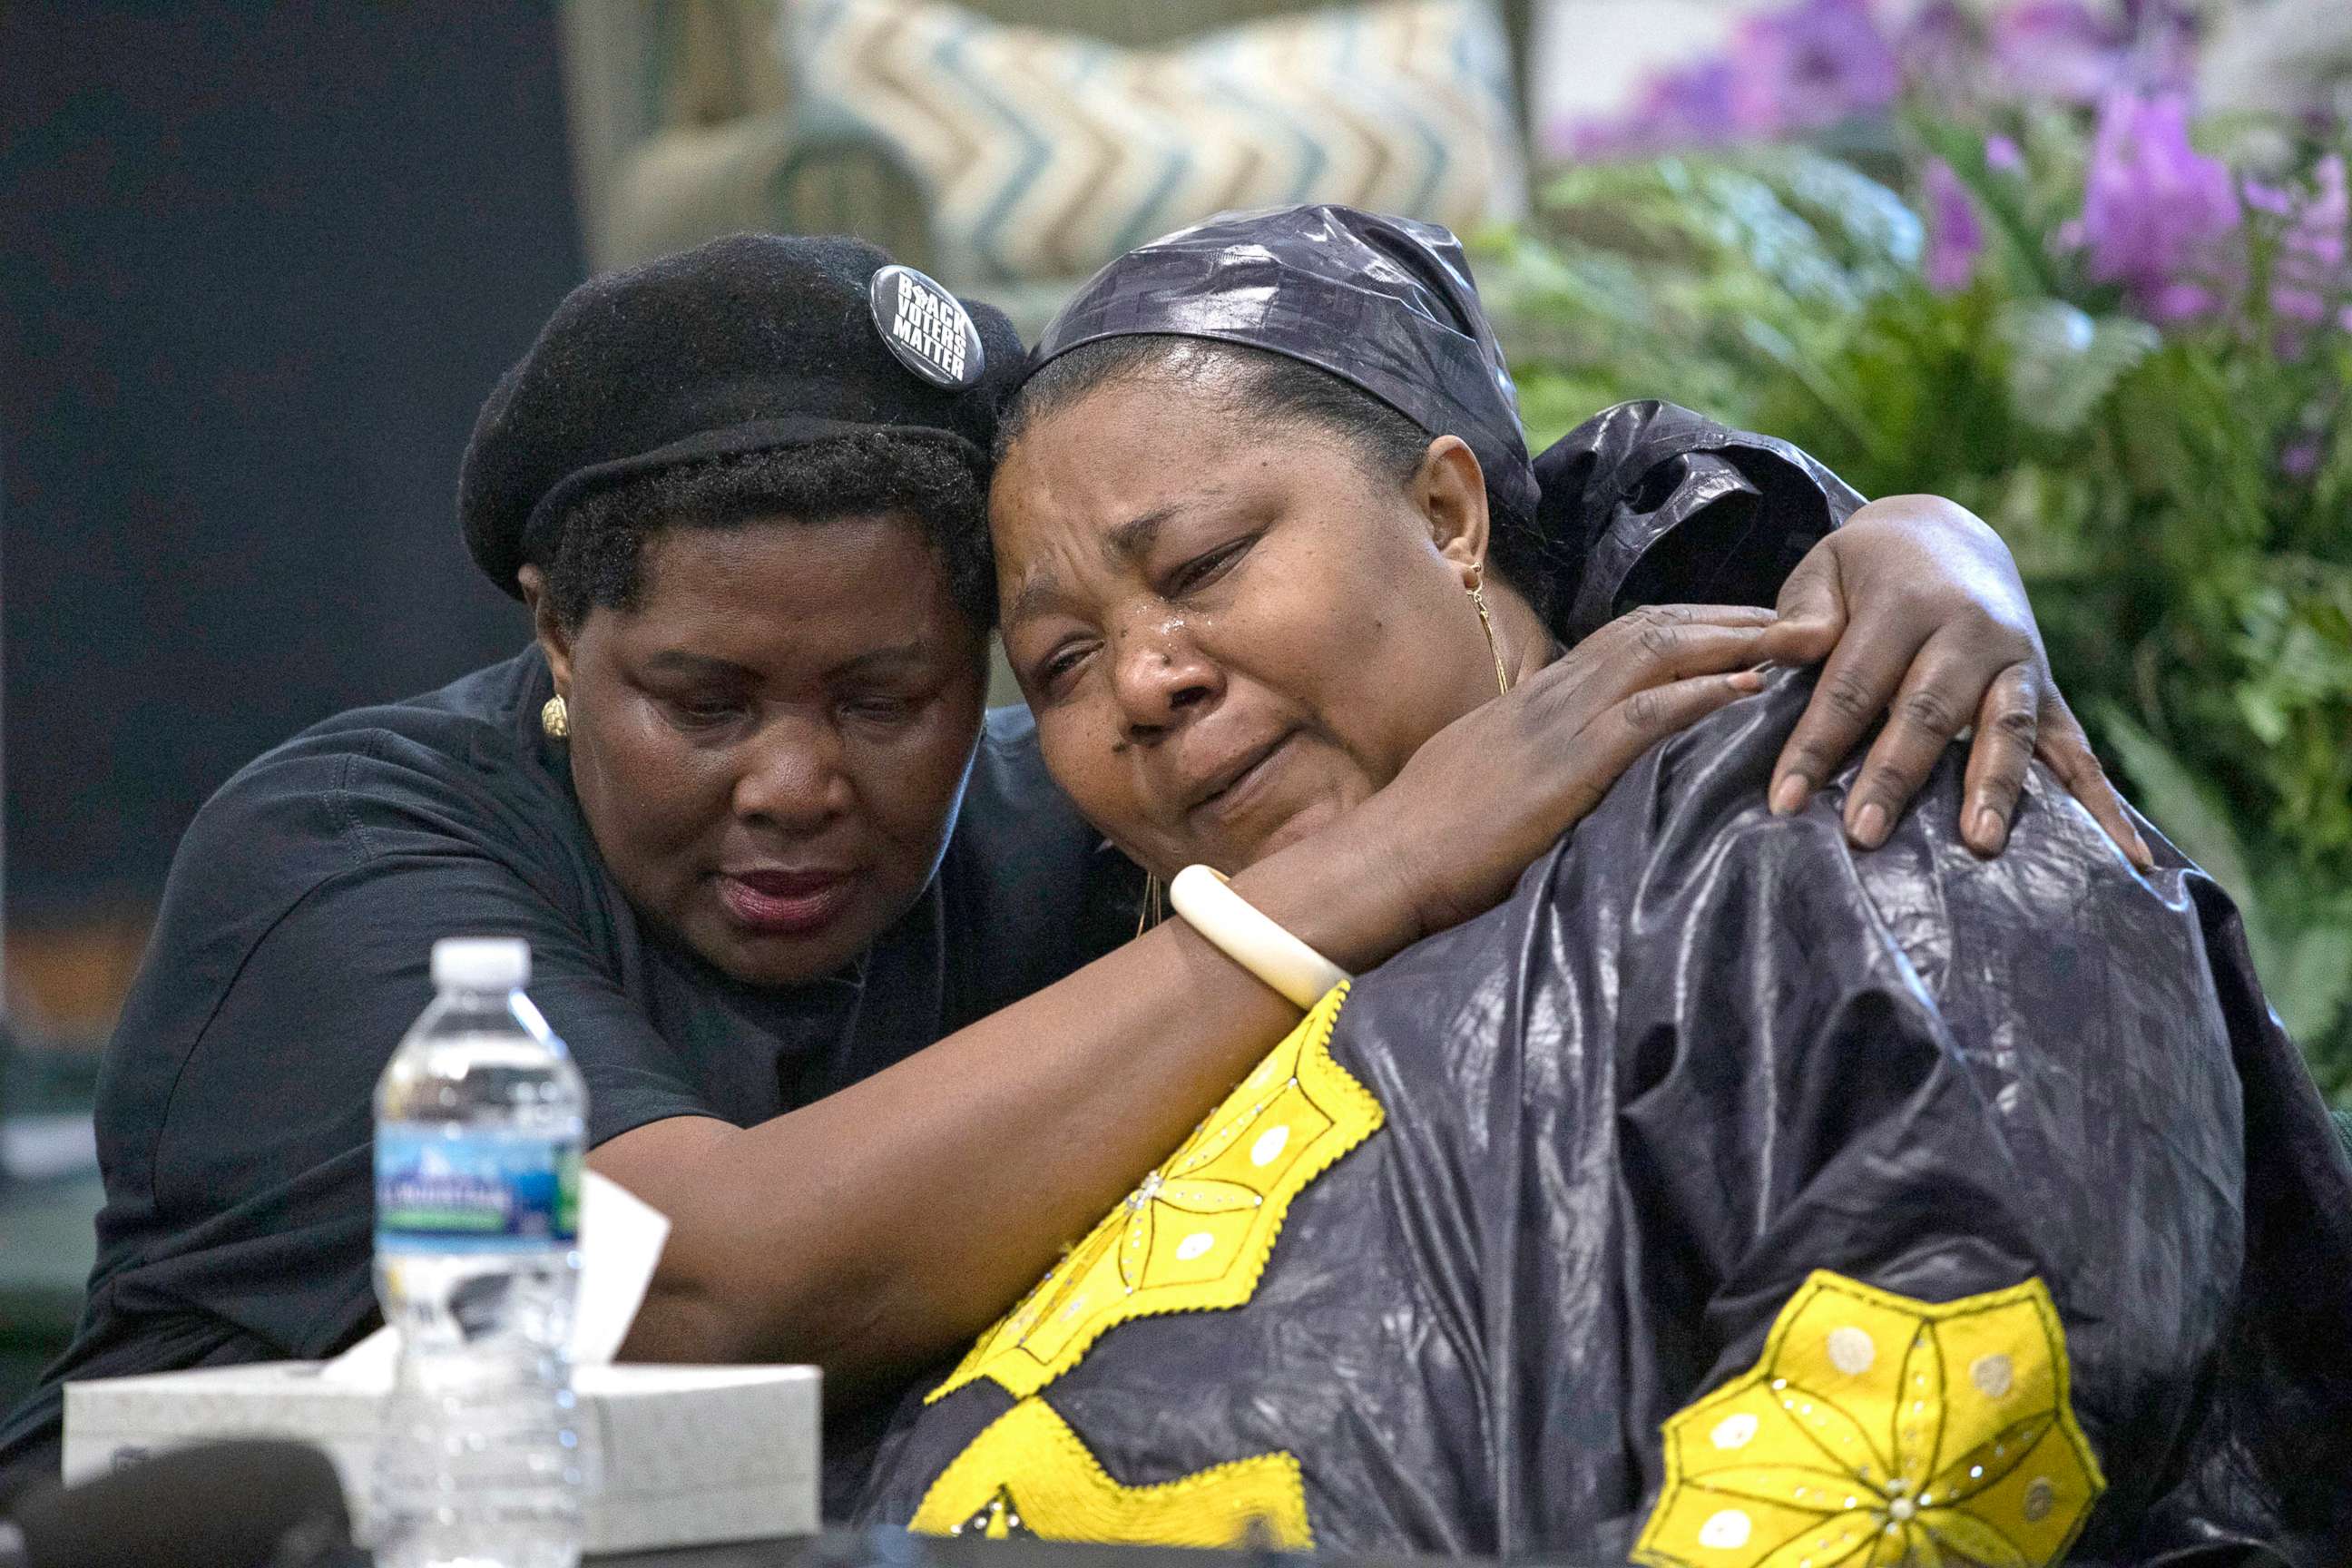 PHOTO: Dorcas Lyoya, the mother of Patrick Lyoya cries during a press conference in Grand Rapids, Mich, April 14, 2022.  The 26-year old Black man was shot and killed by a white Grand Rapids police officer following a traffic stop.